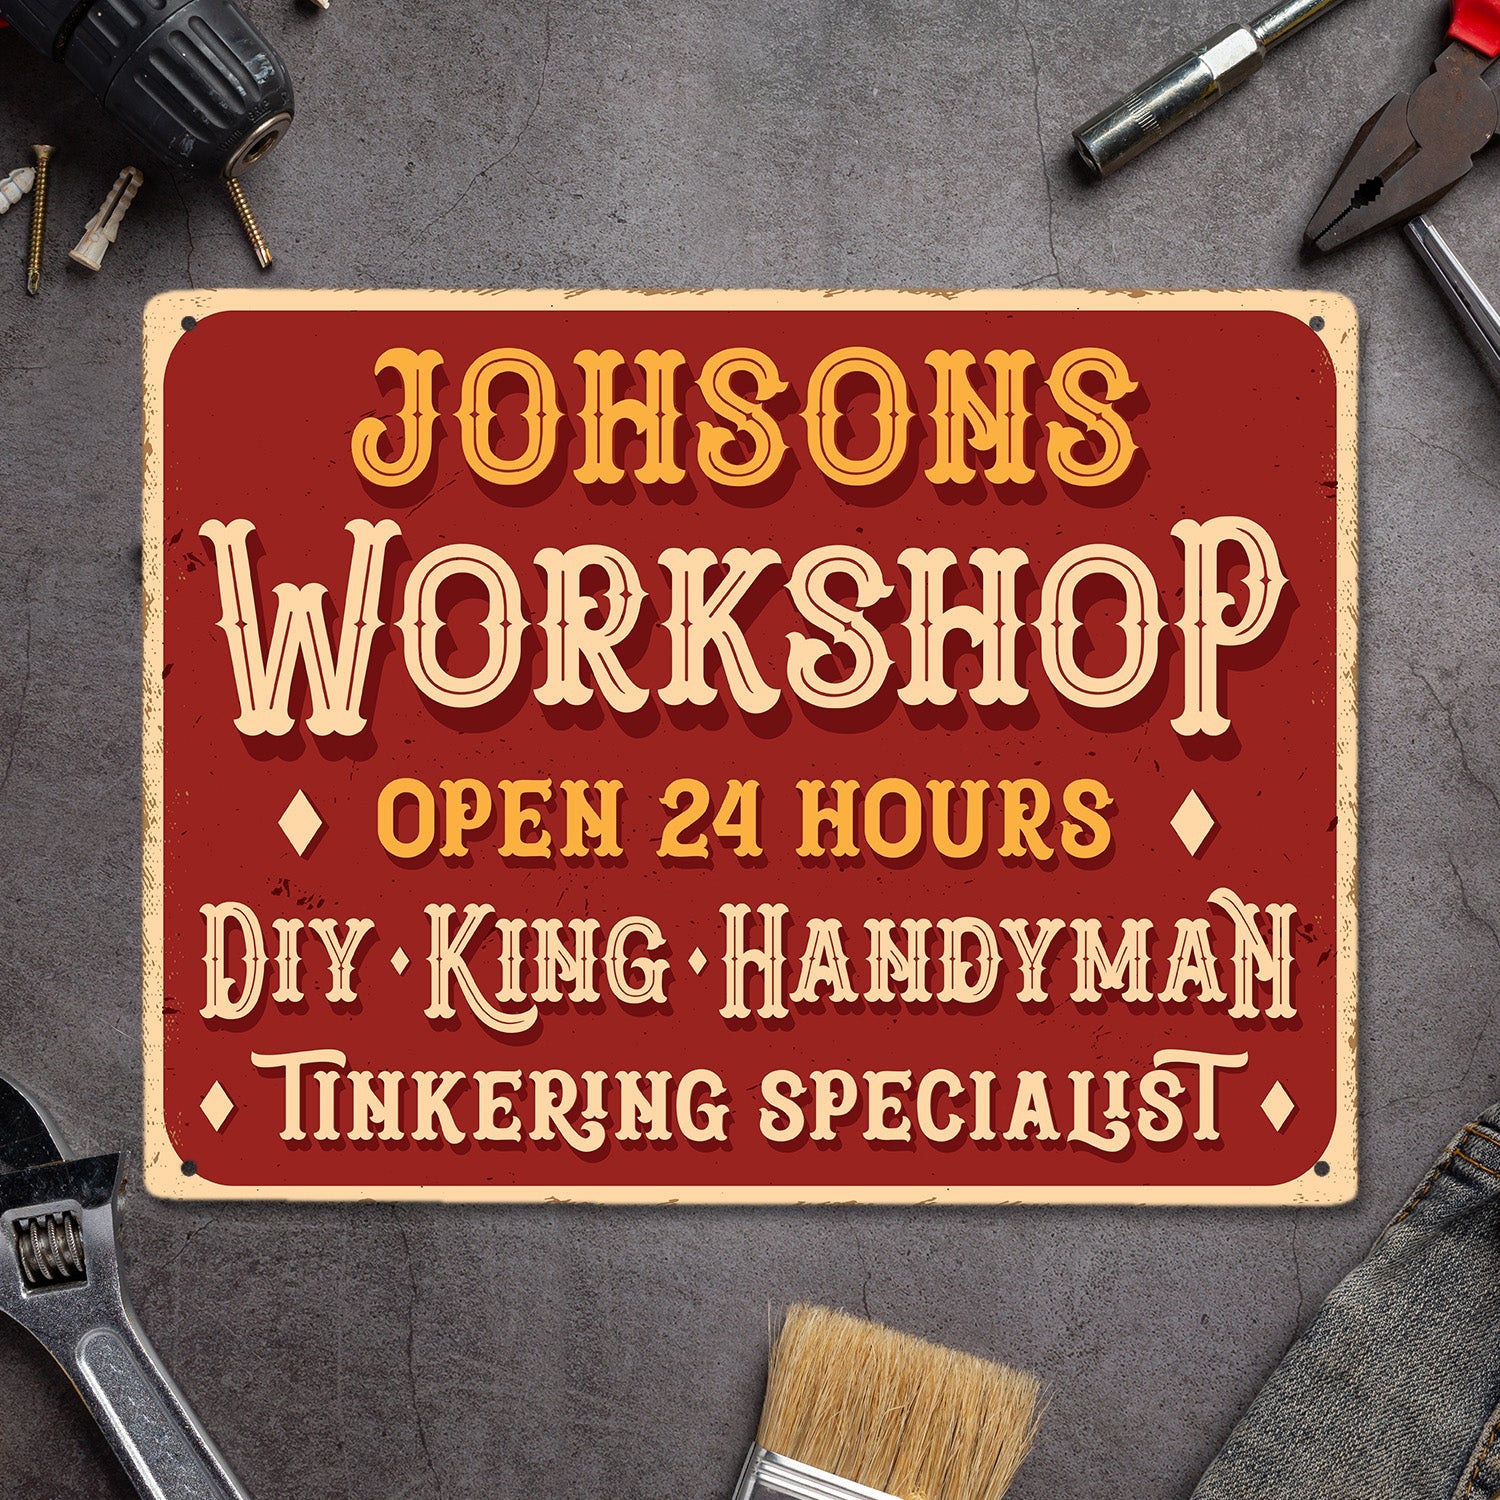 Custom Workshop Sign, Personalized Name, 24 Hours DIY, King, Handyman, Tinkering, Specialist